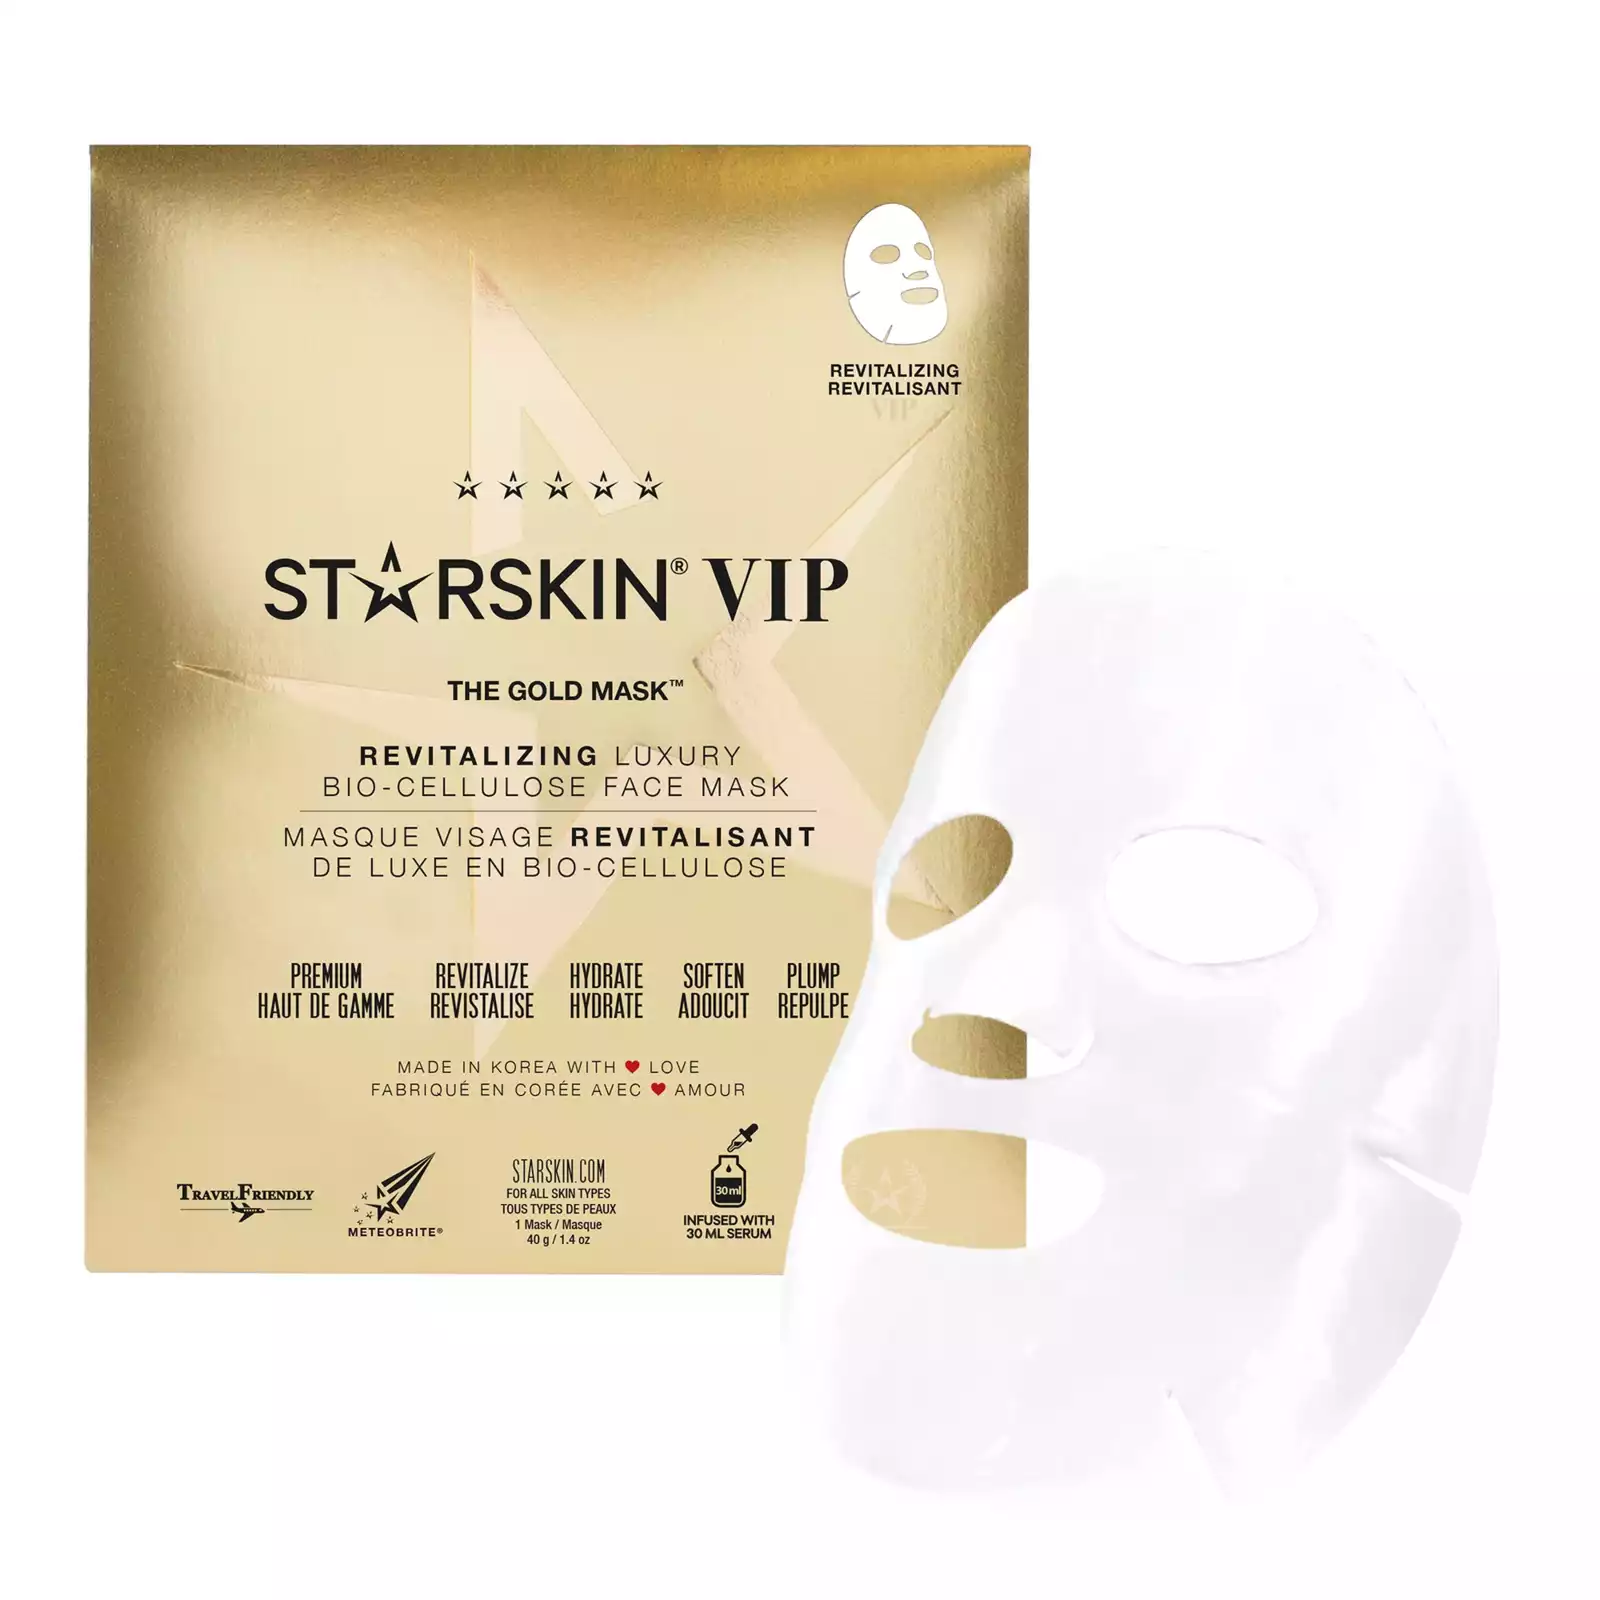 – VIP The Gold Mask